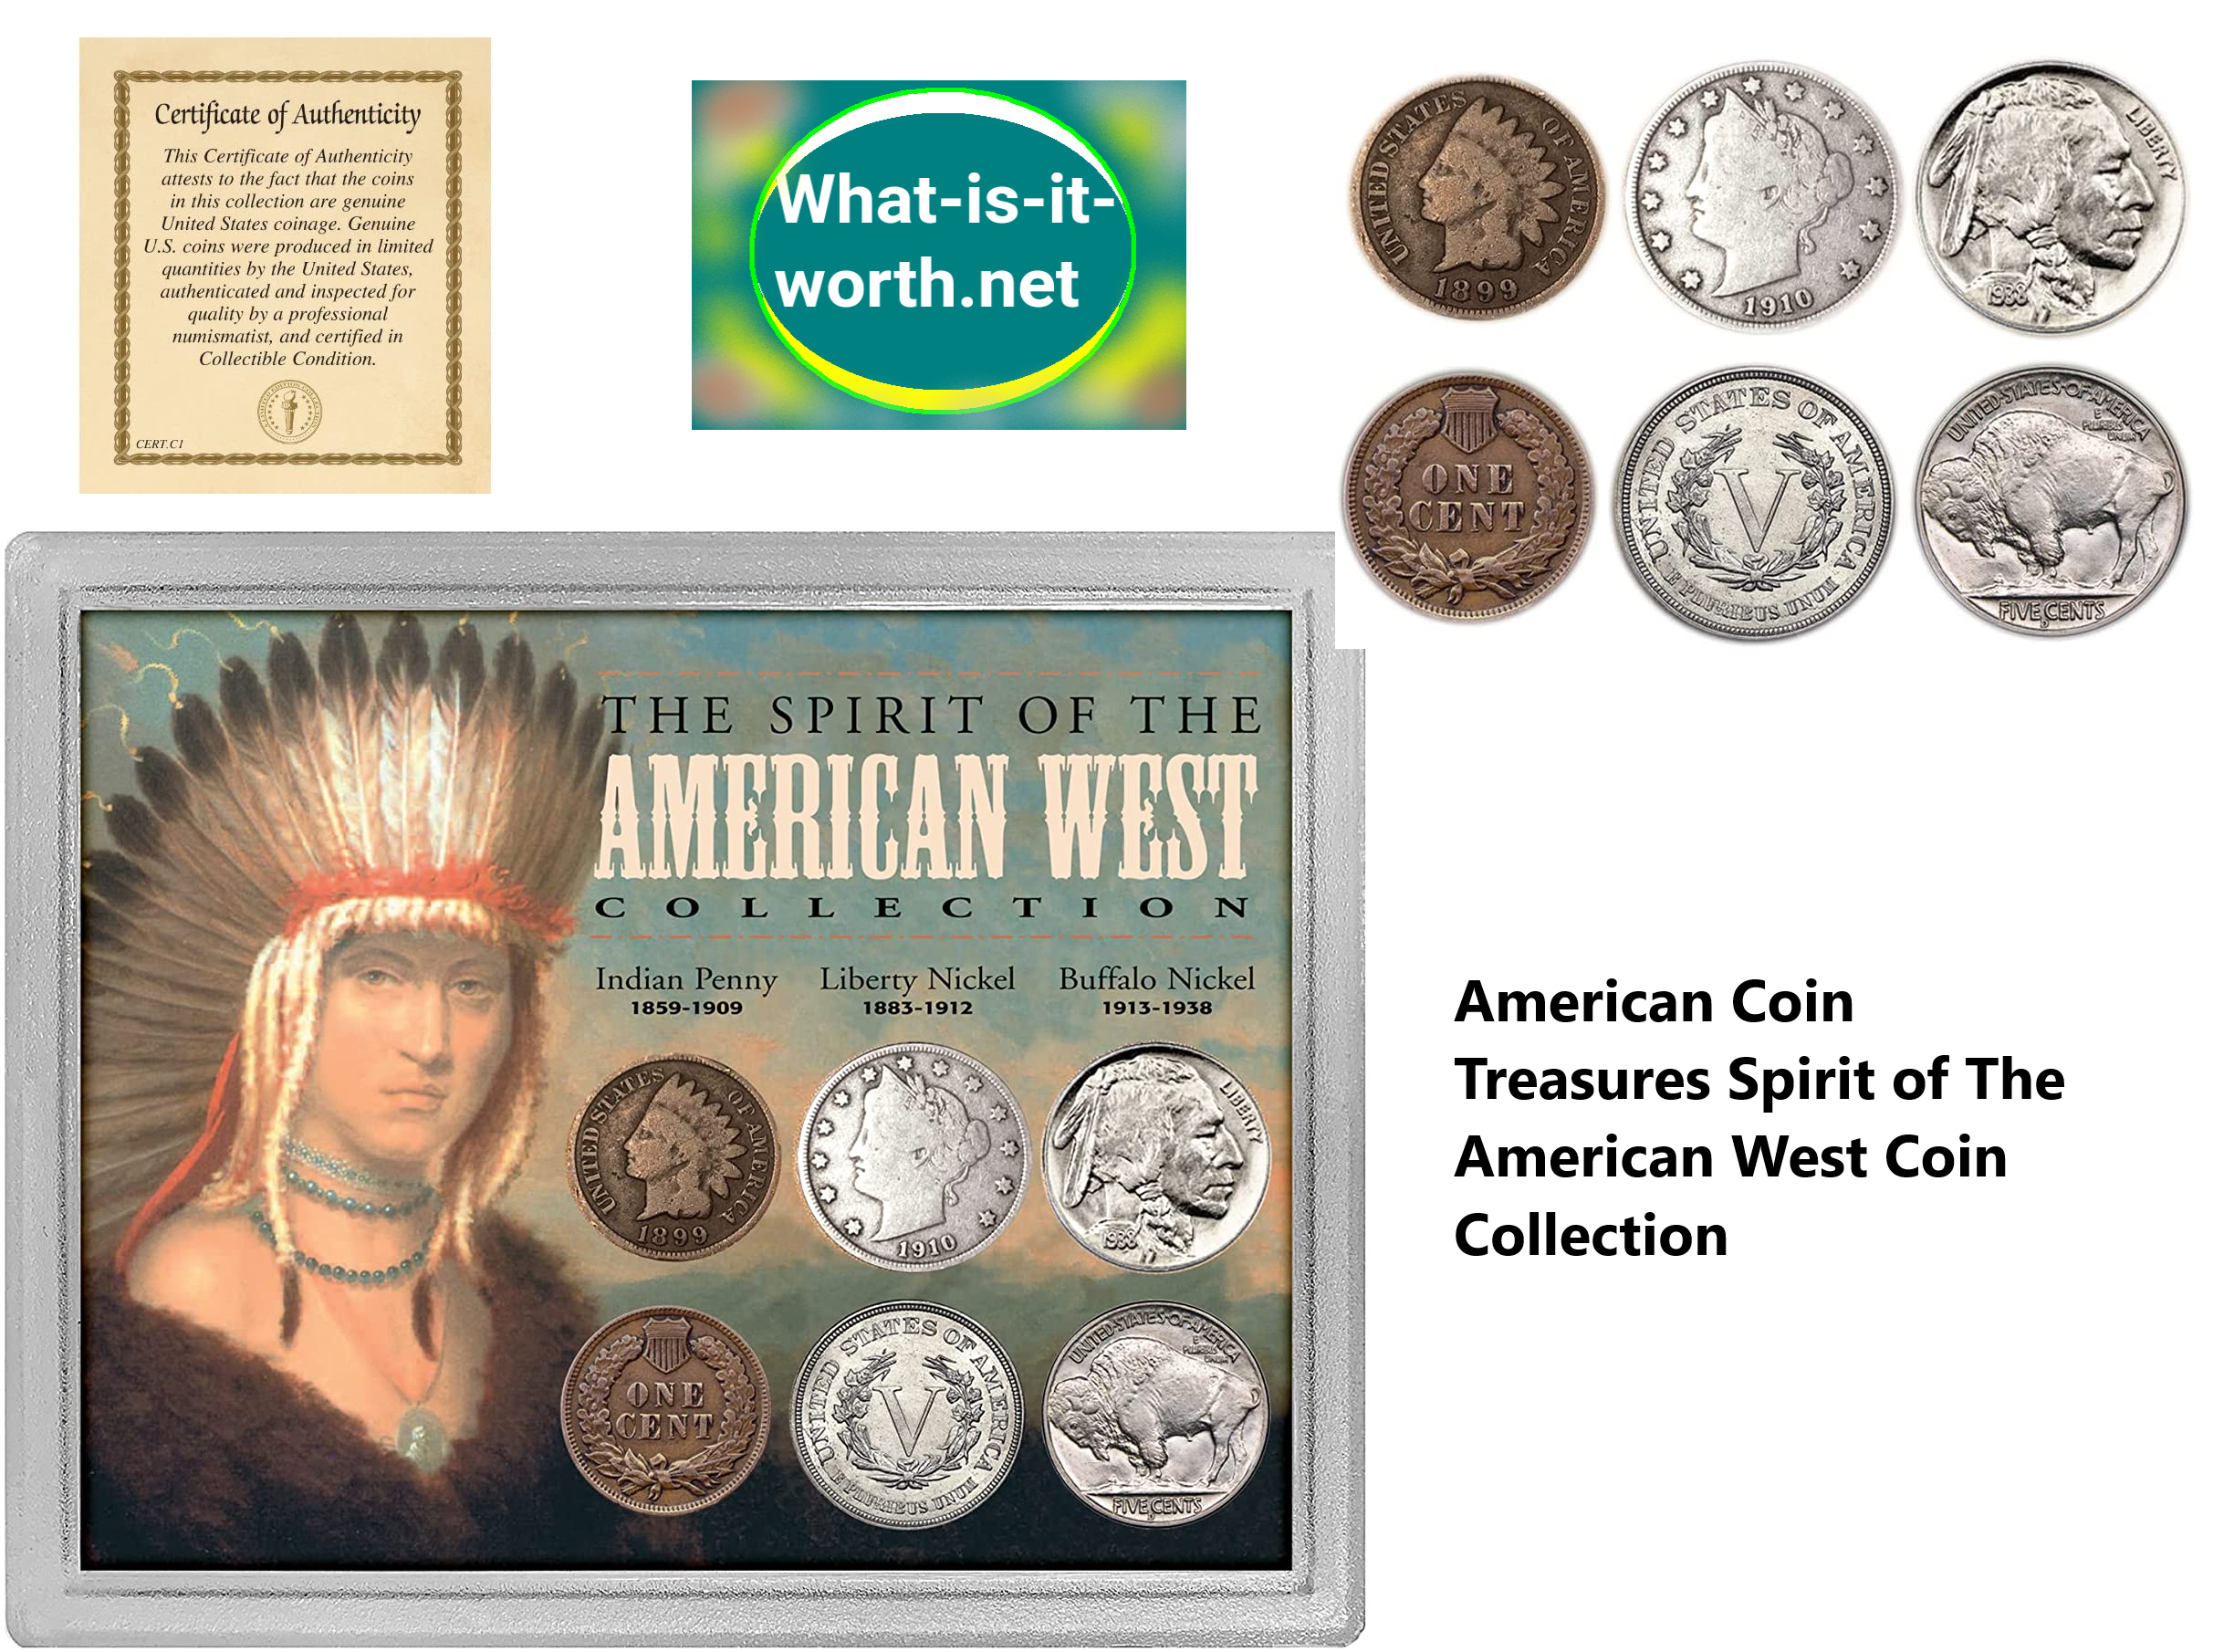 American Coin Treasures Spirit of The American West Coin Collection.png